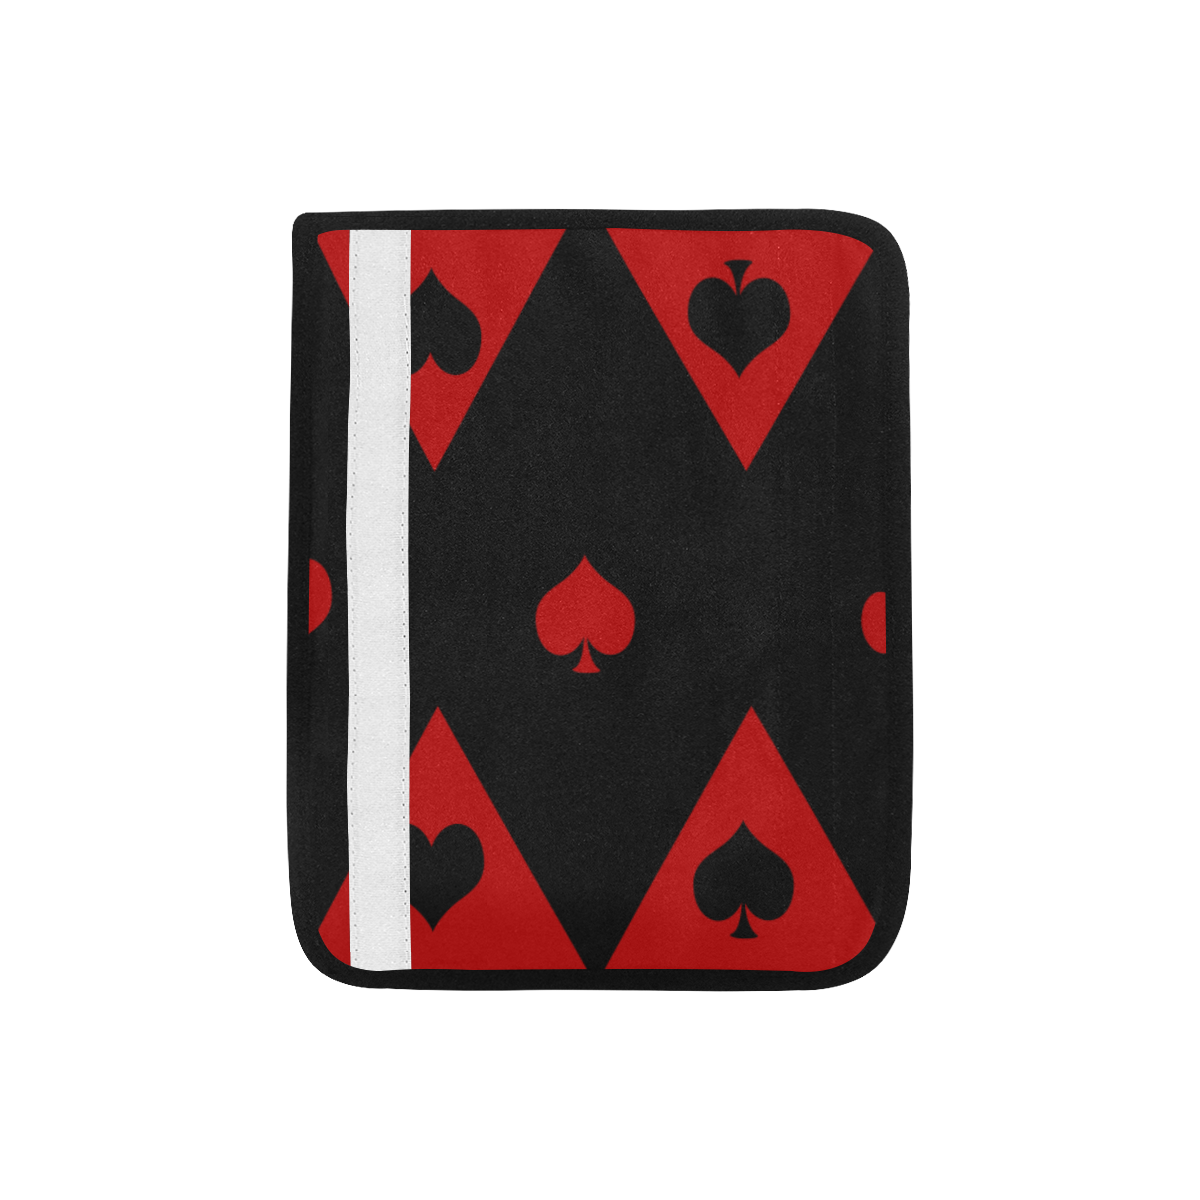 Las Vegas Black Red Play Card Shapes Car Seat Belt Cover 7''x8.5''